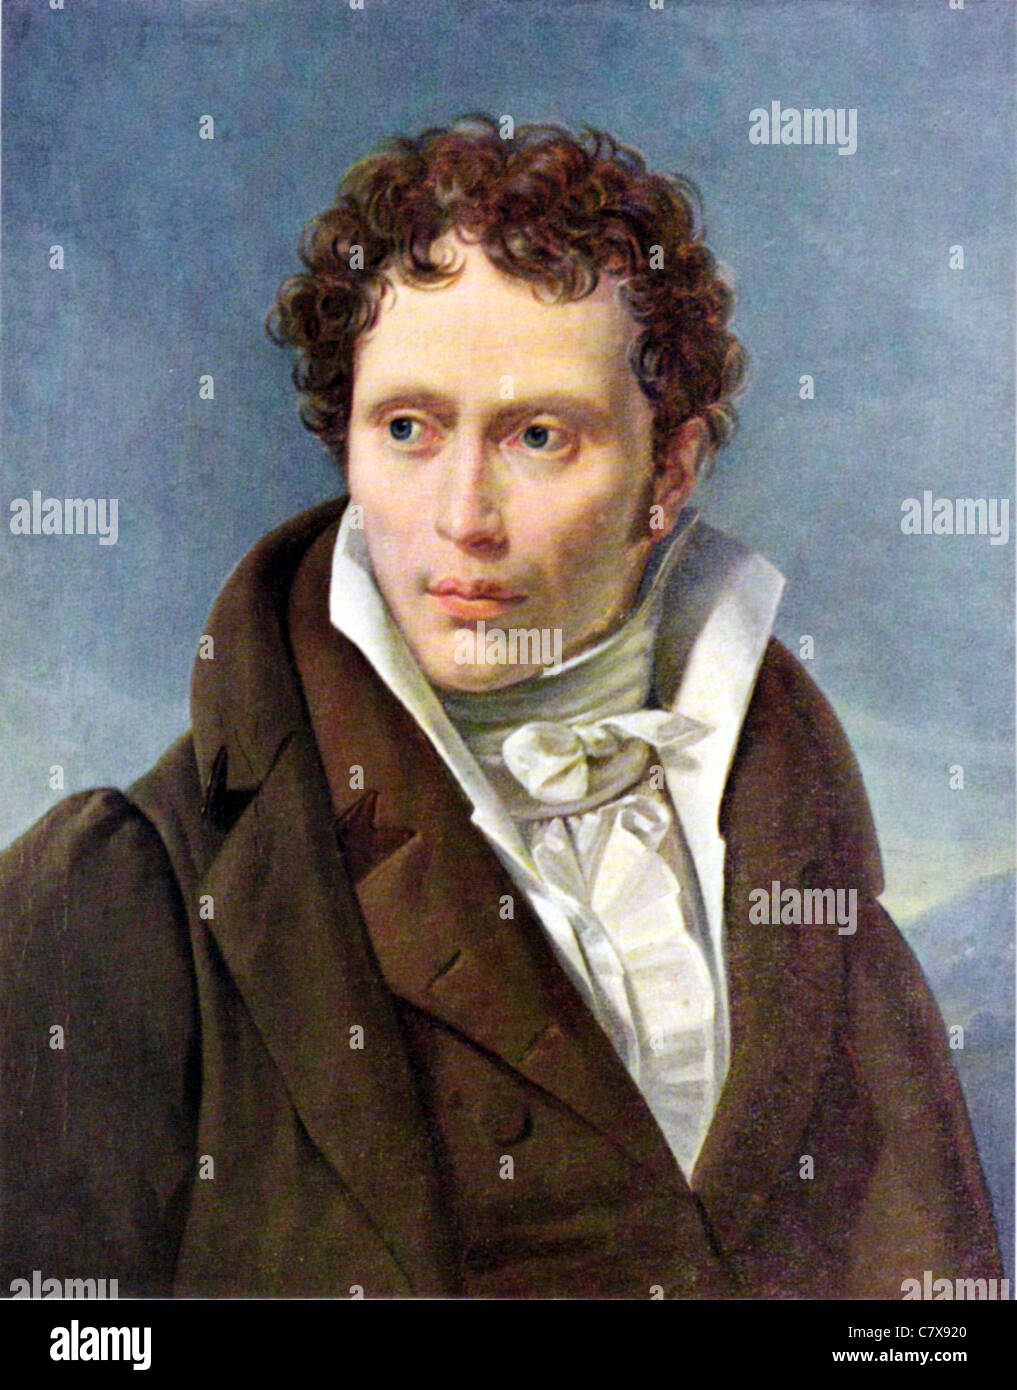 ARTHUR SCHOPENHAUER (1788-1860) German philosopher about 1815 in a painting by Ludwig Ruhl Stock Photo